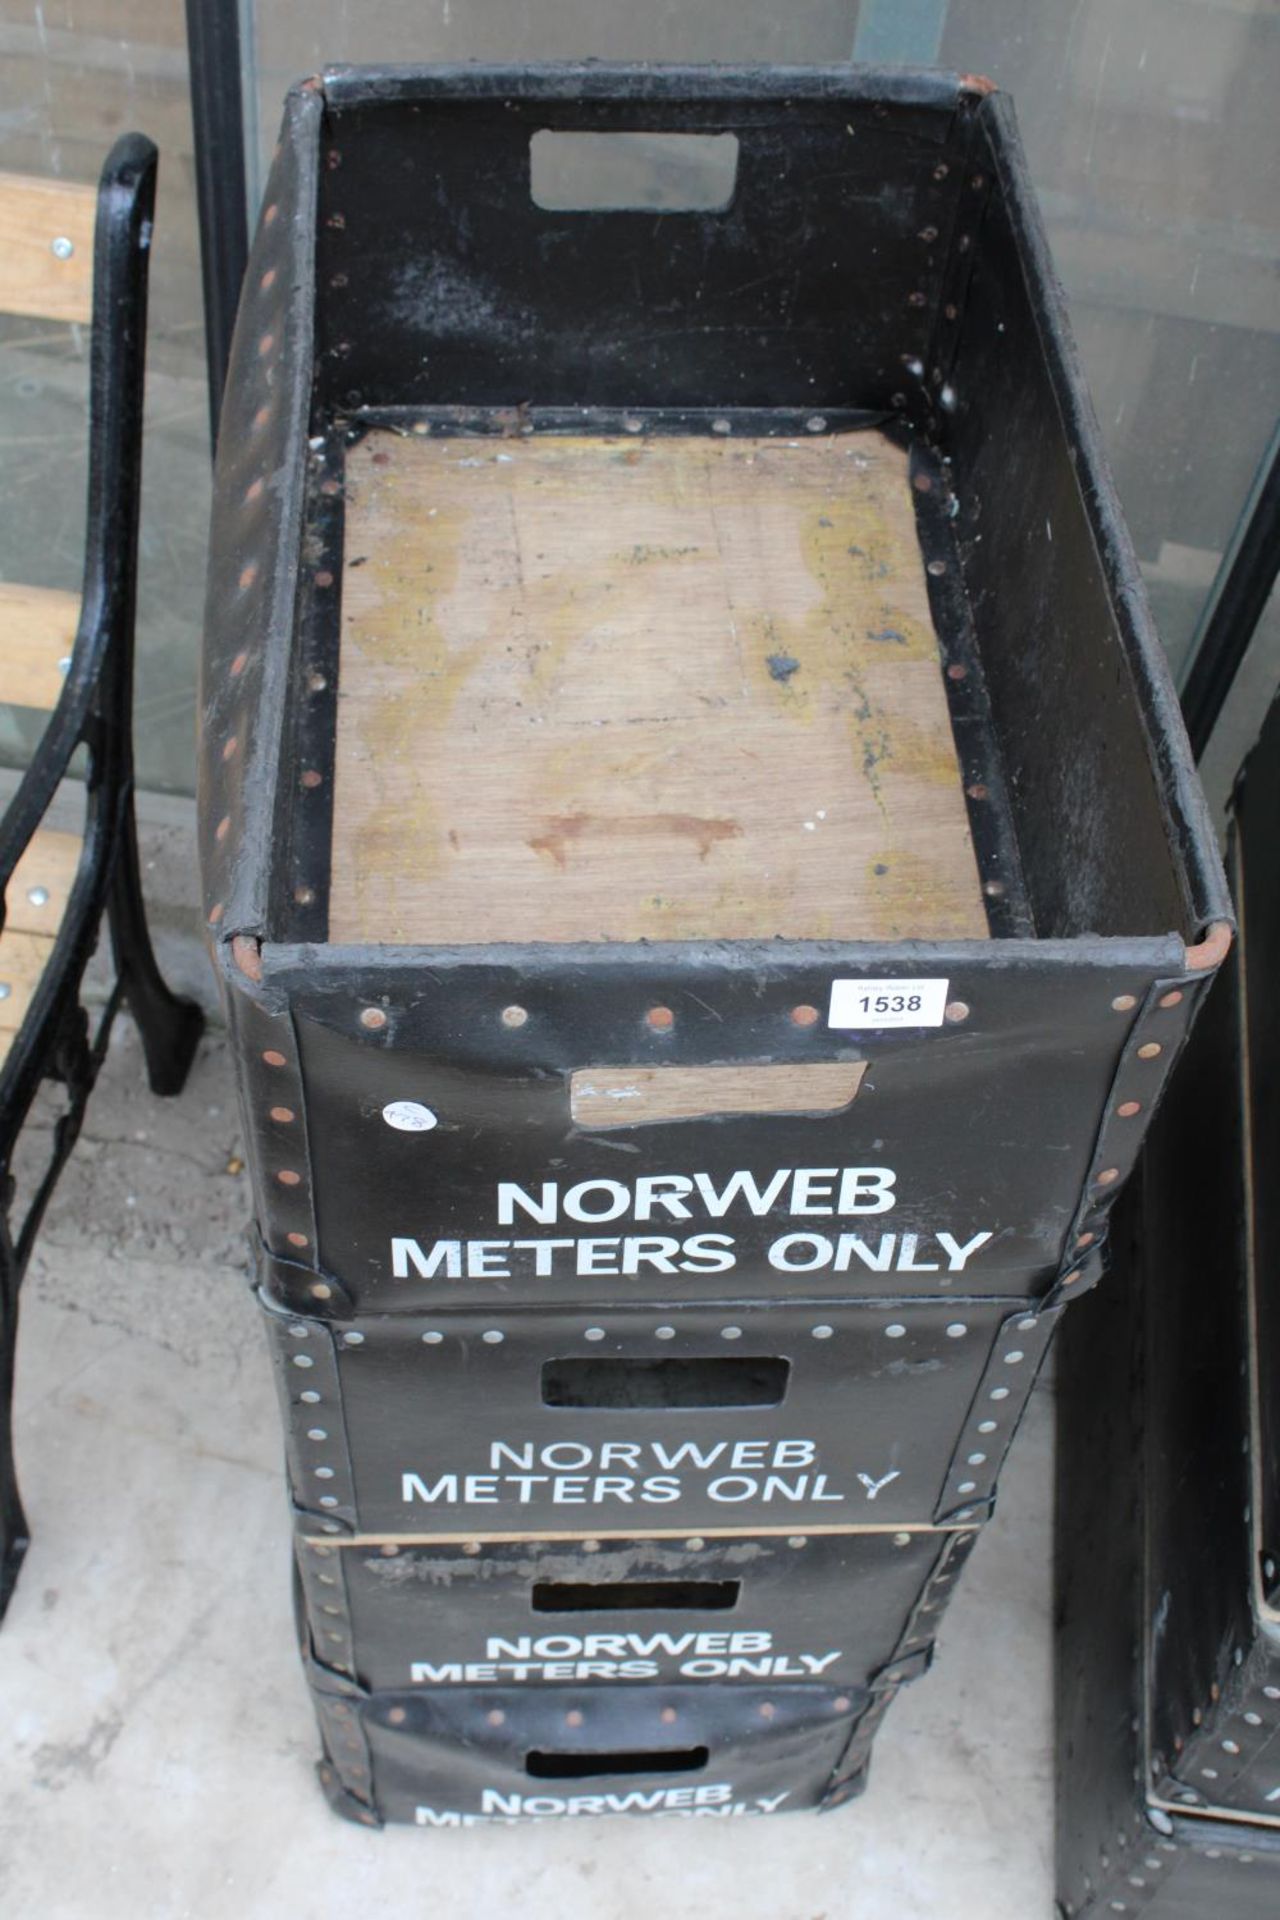 FOUR VINTAGE NORWEB METER CARRYING BOXES - Image 2 of 3